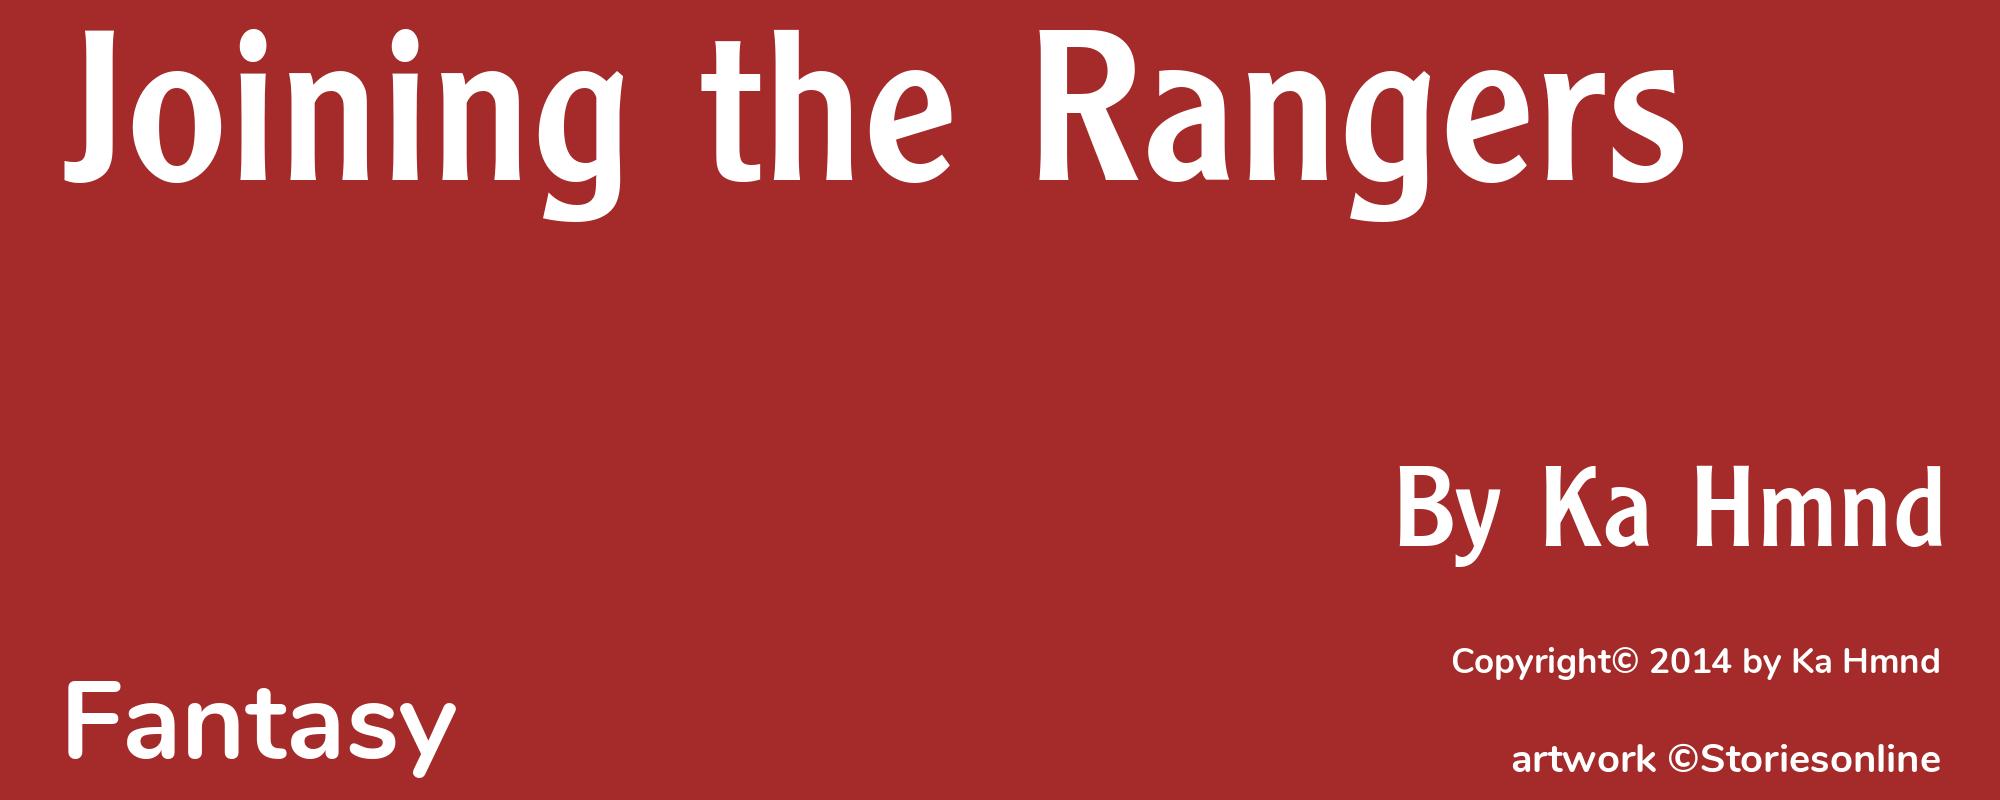 Joining the Rangers - Cover